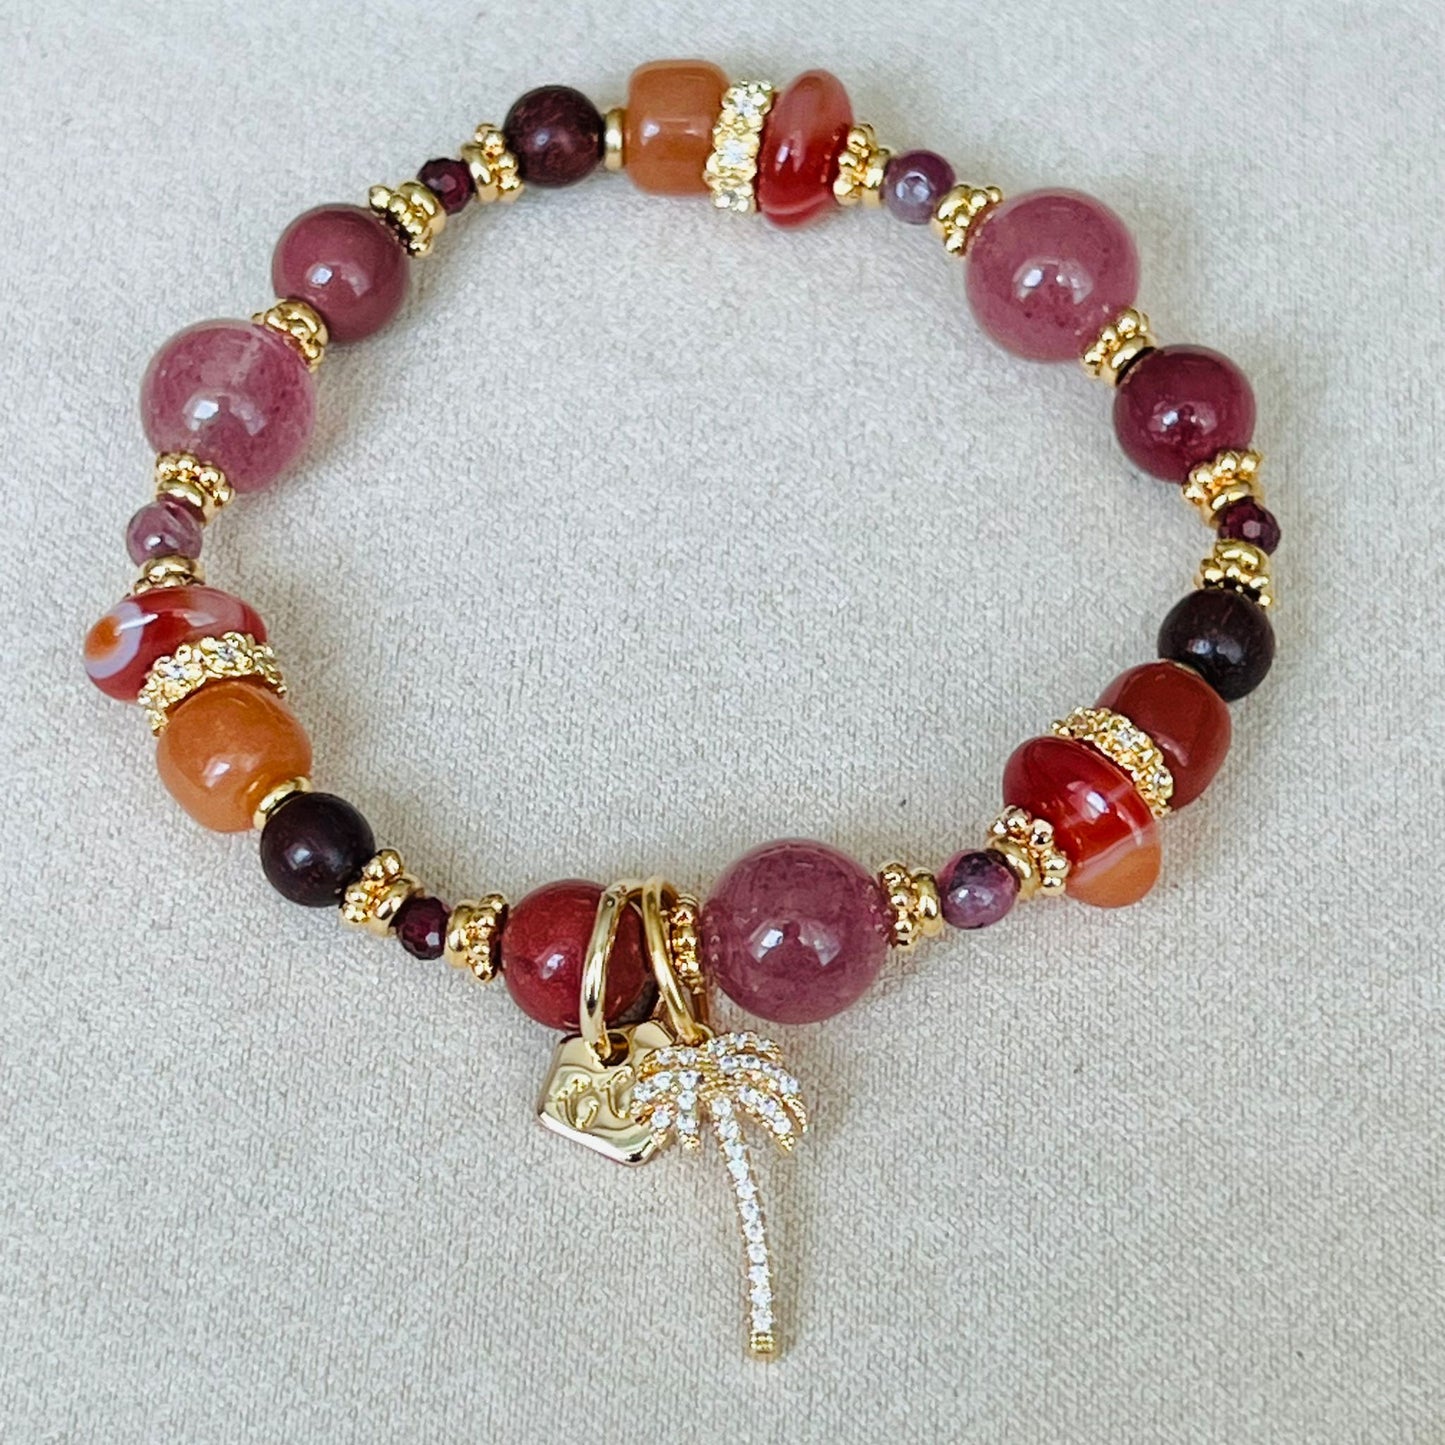 Looking For Stability, Creativity & Confidence Bracelet